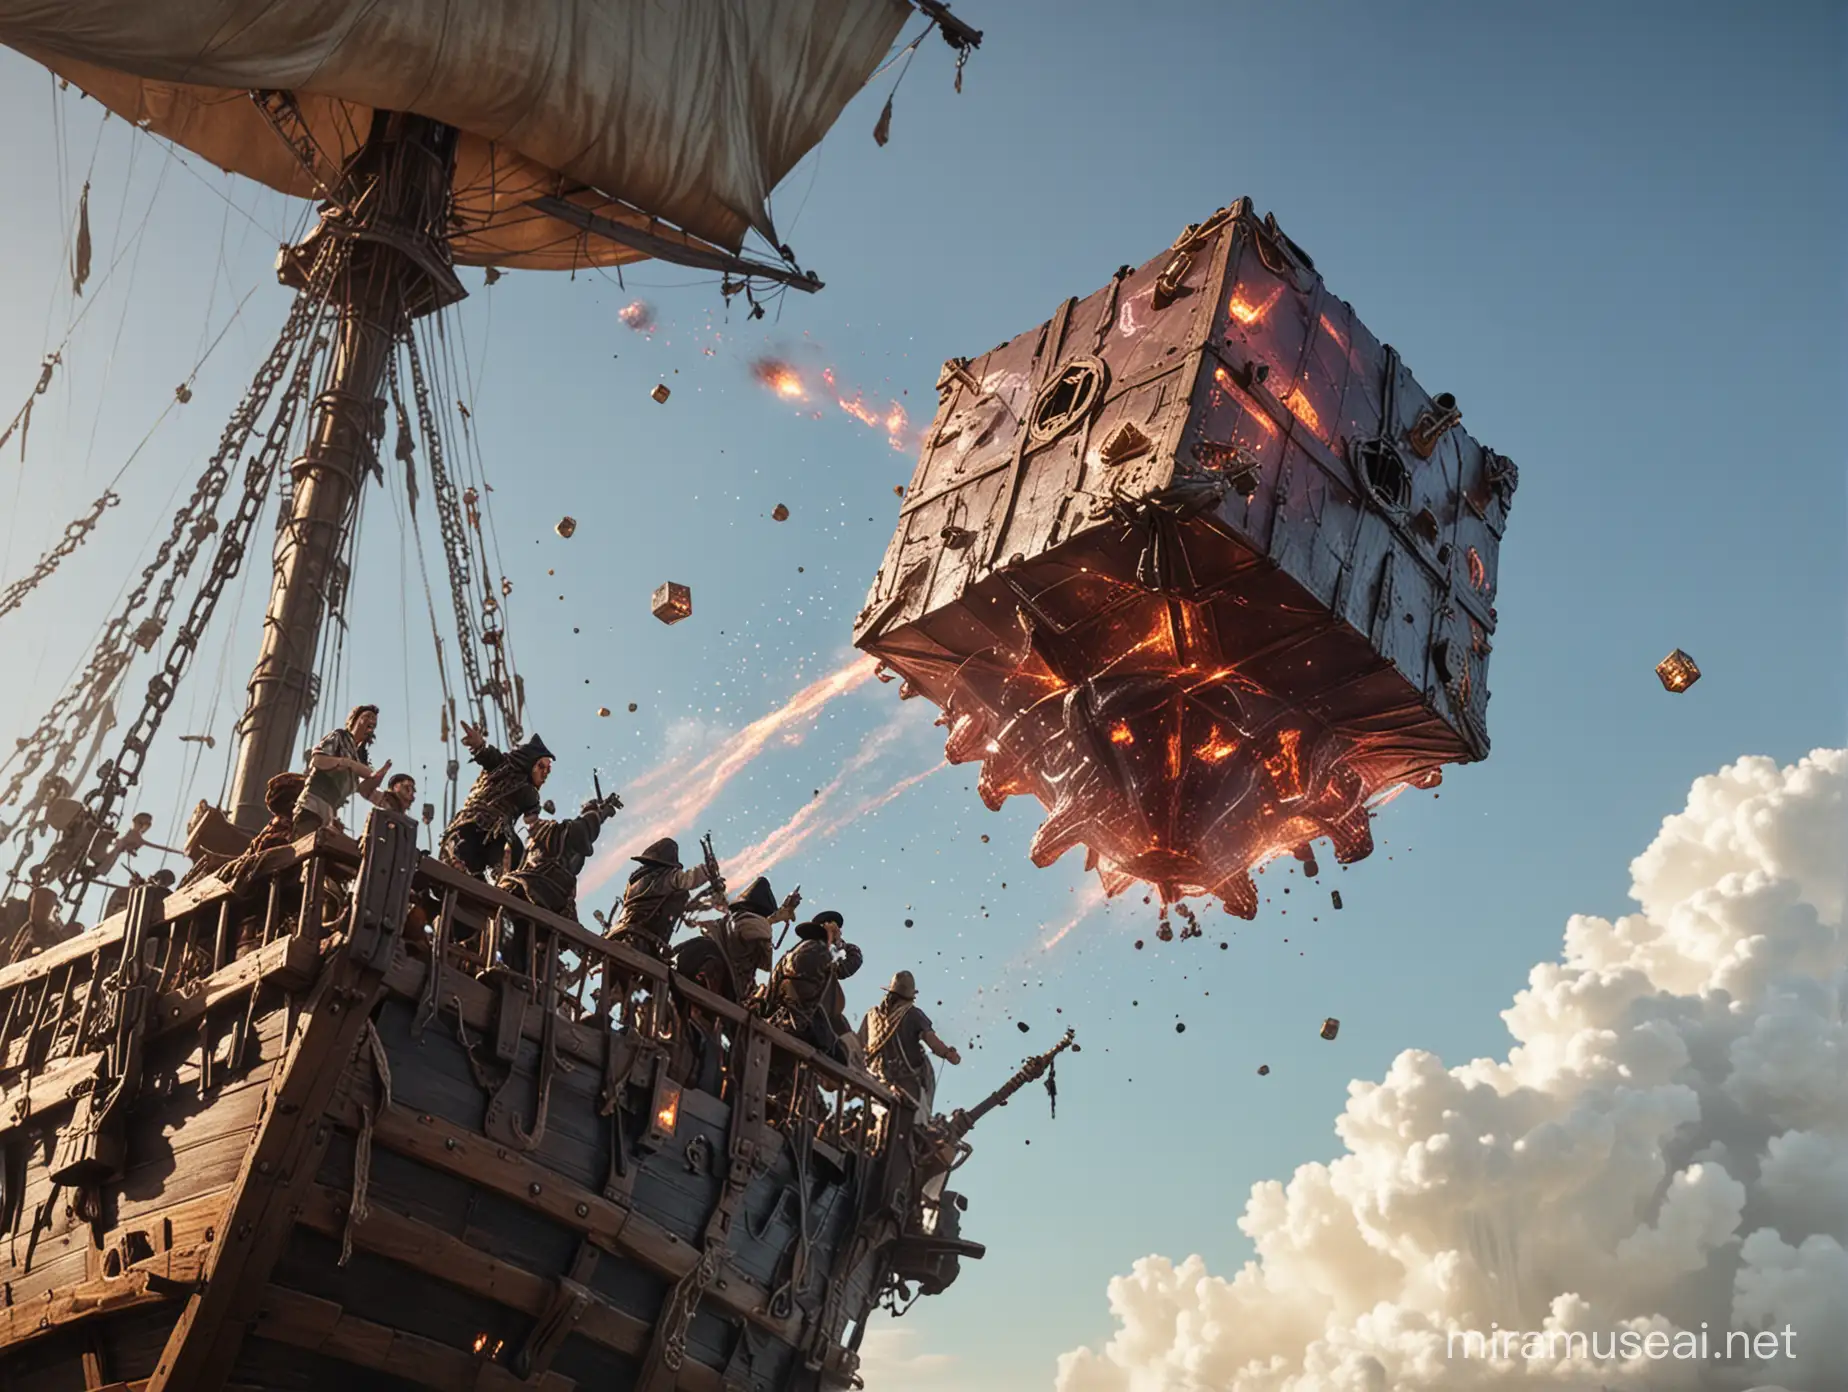 A gelatinous cube from dungeons and dragons being shot through the air from a catapult on a large pirate ship